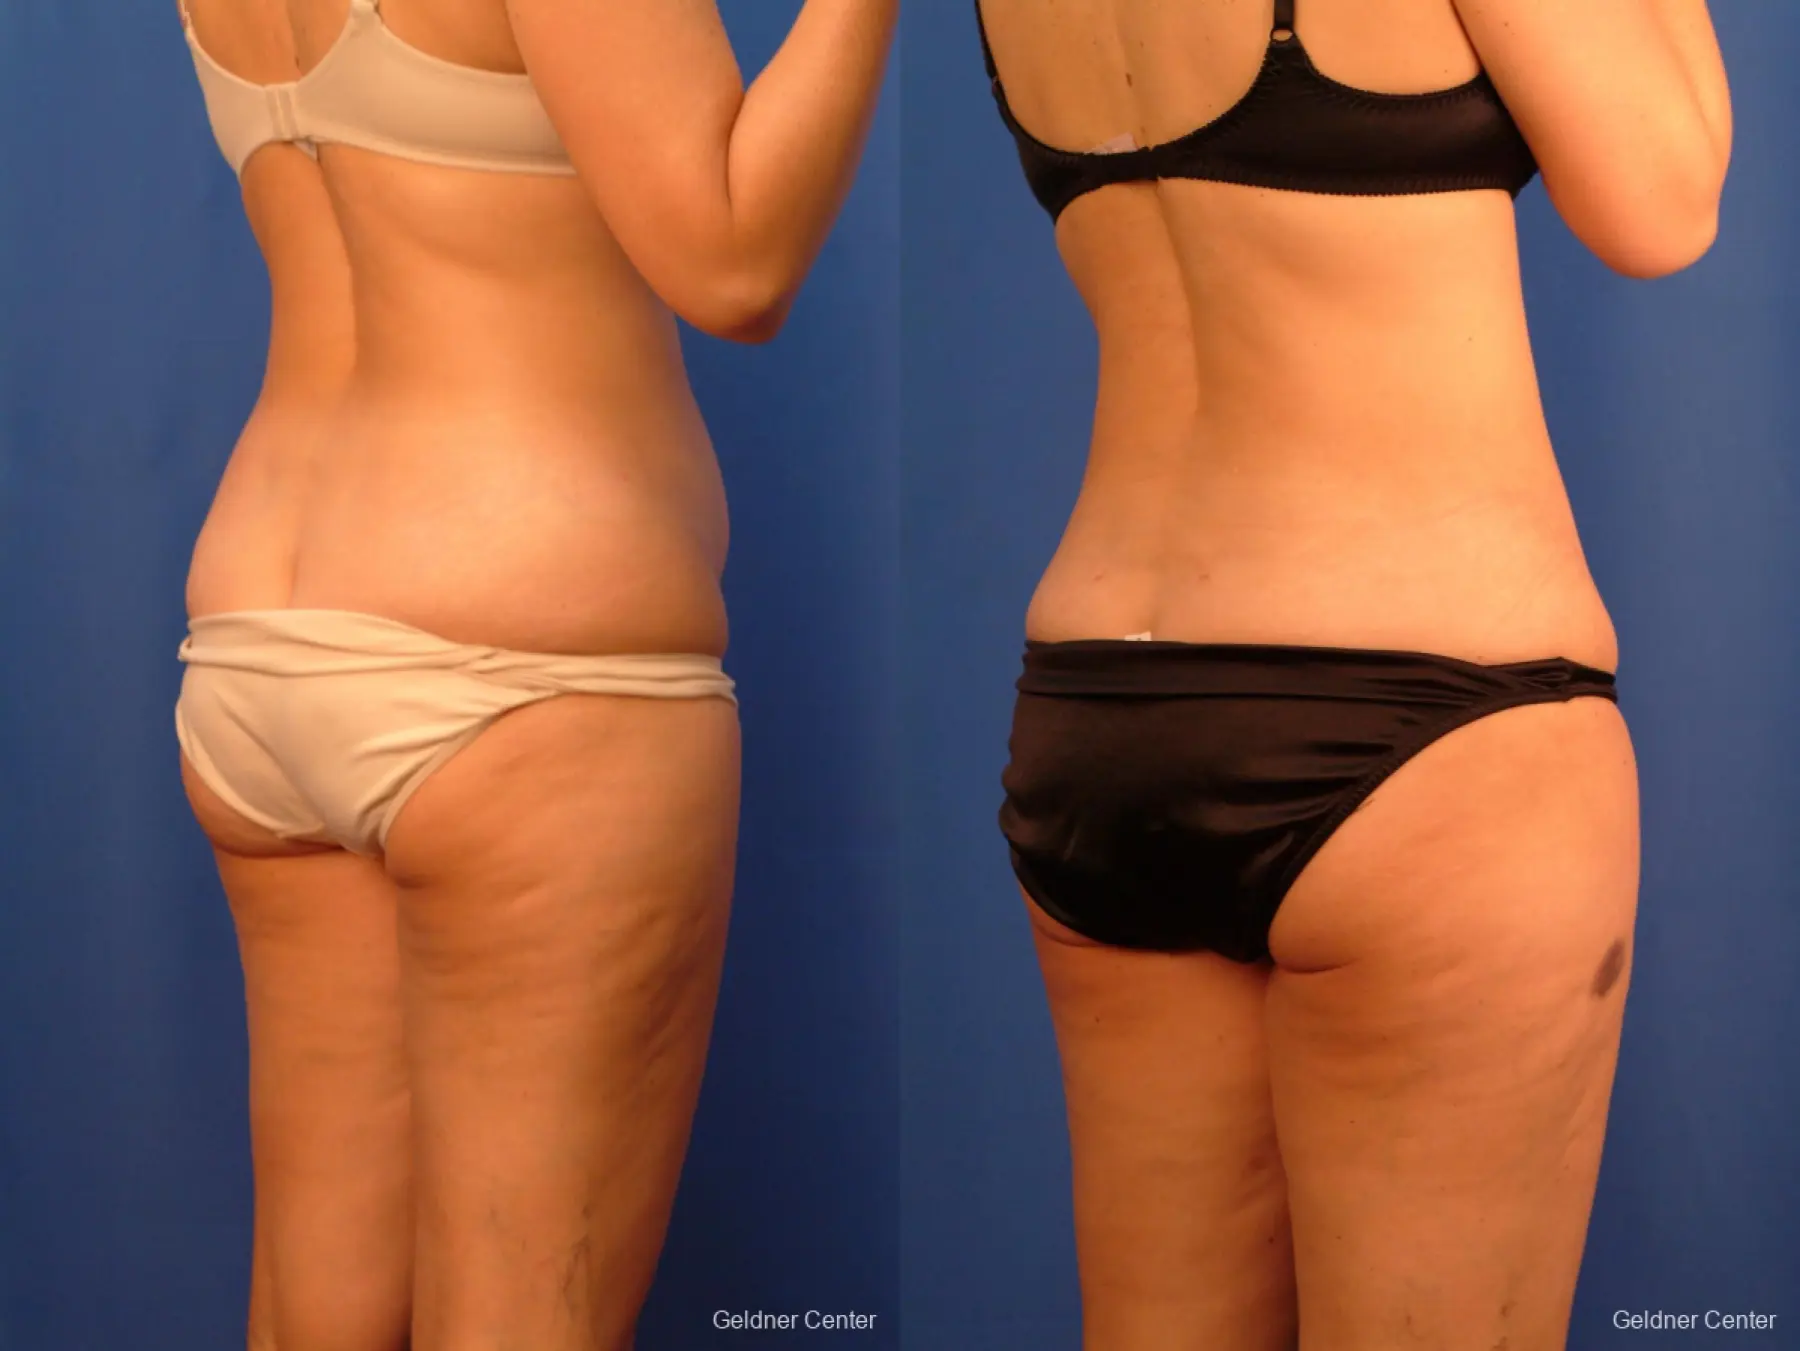 Vaser lipo patient 2520 before and after photos - Before and After 3